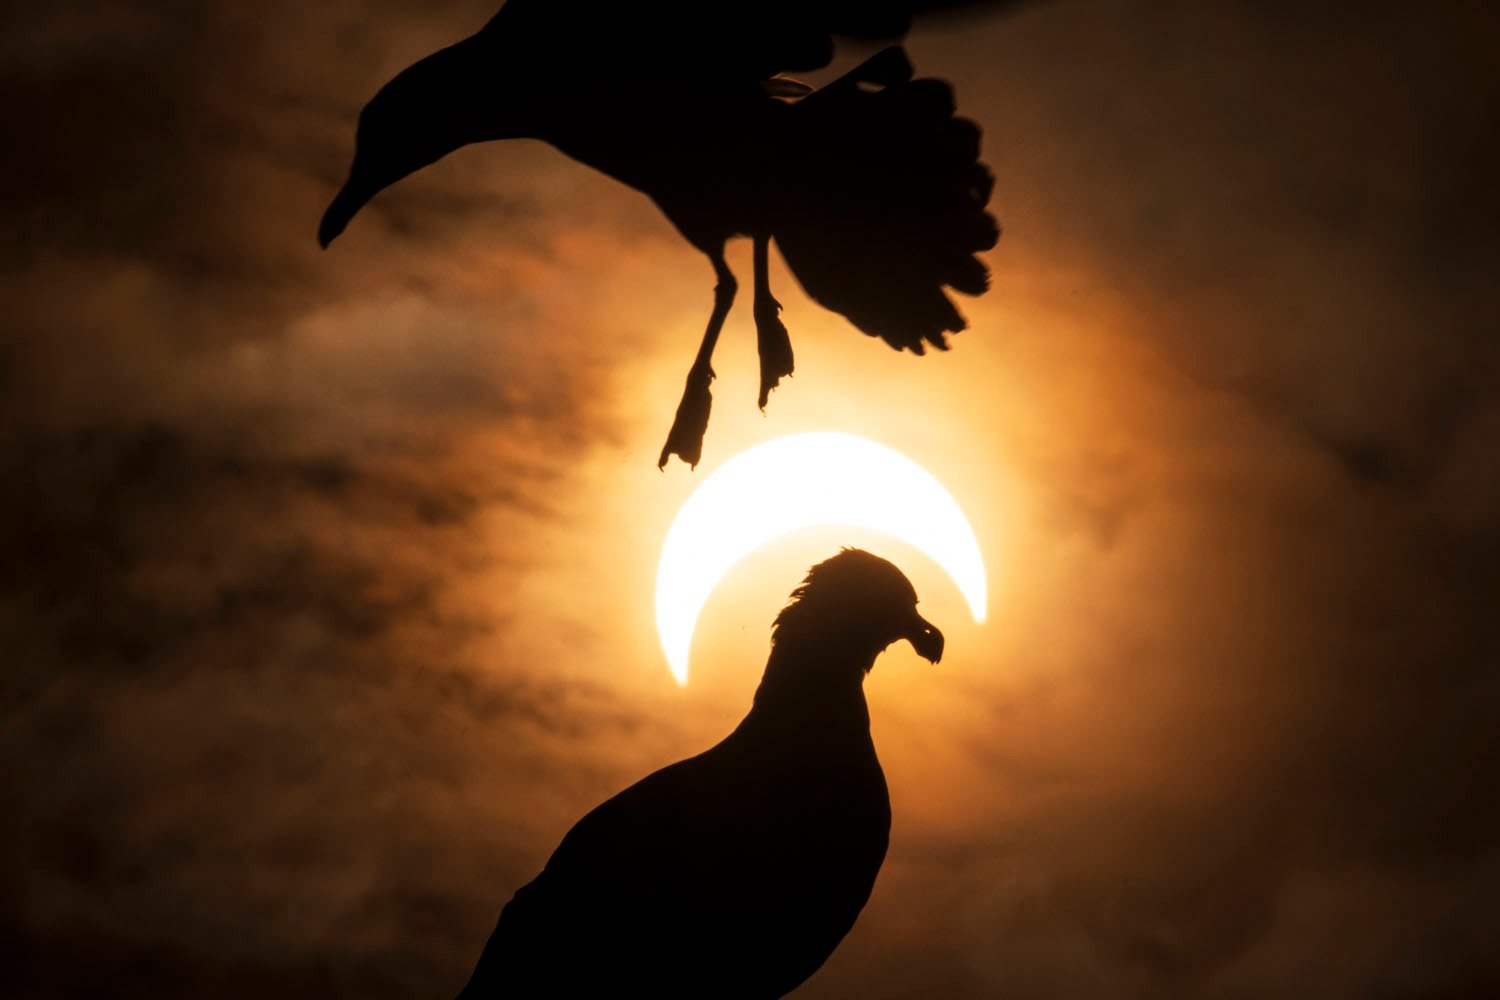 Silhouettes of two pigeons in flight against a dramatic solar eclipse, with one pigeon partially overlapping the glowing sun.